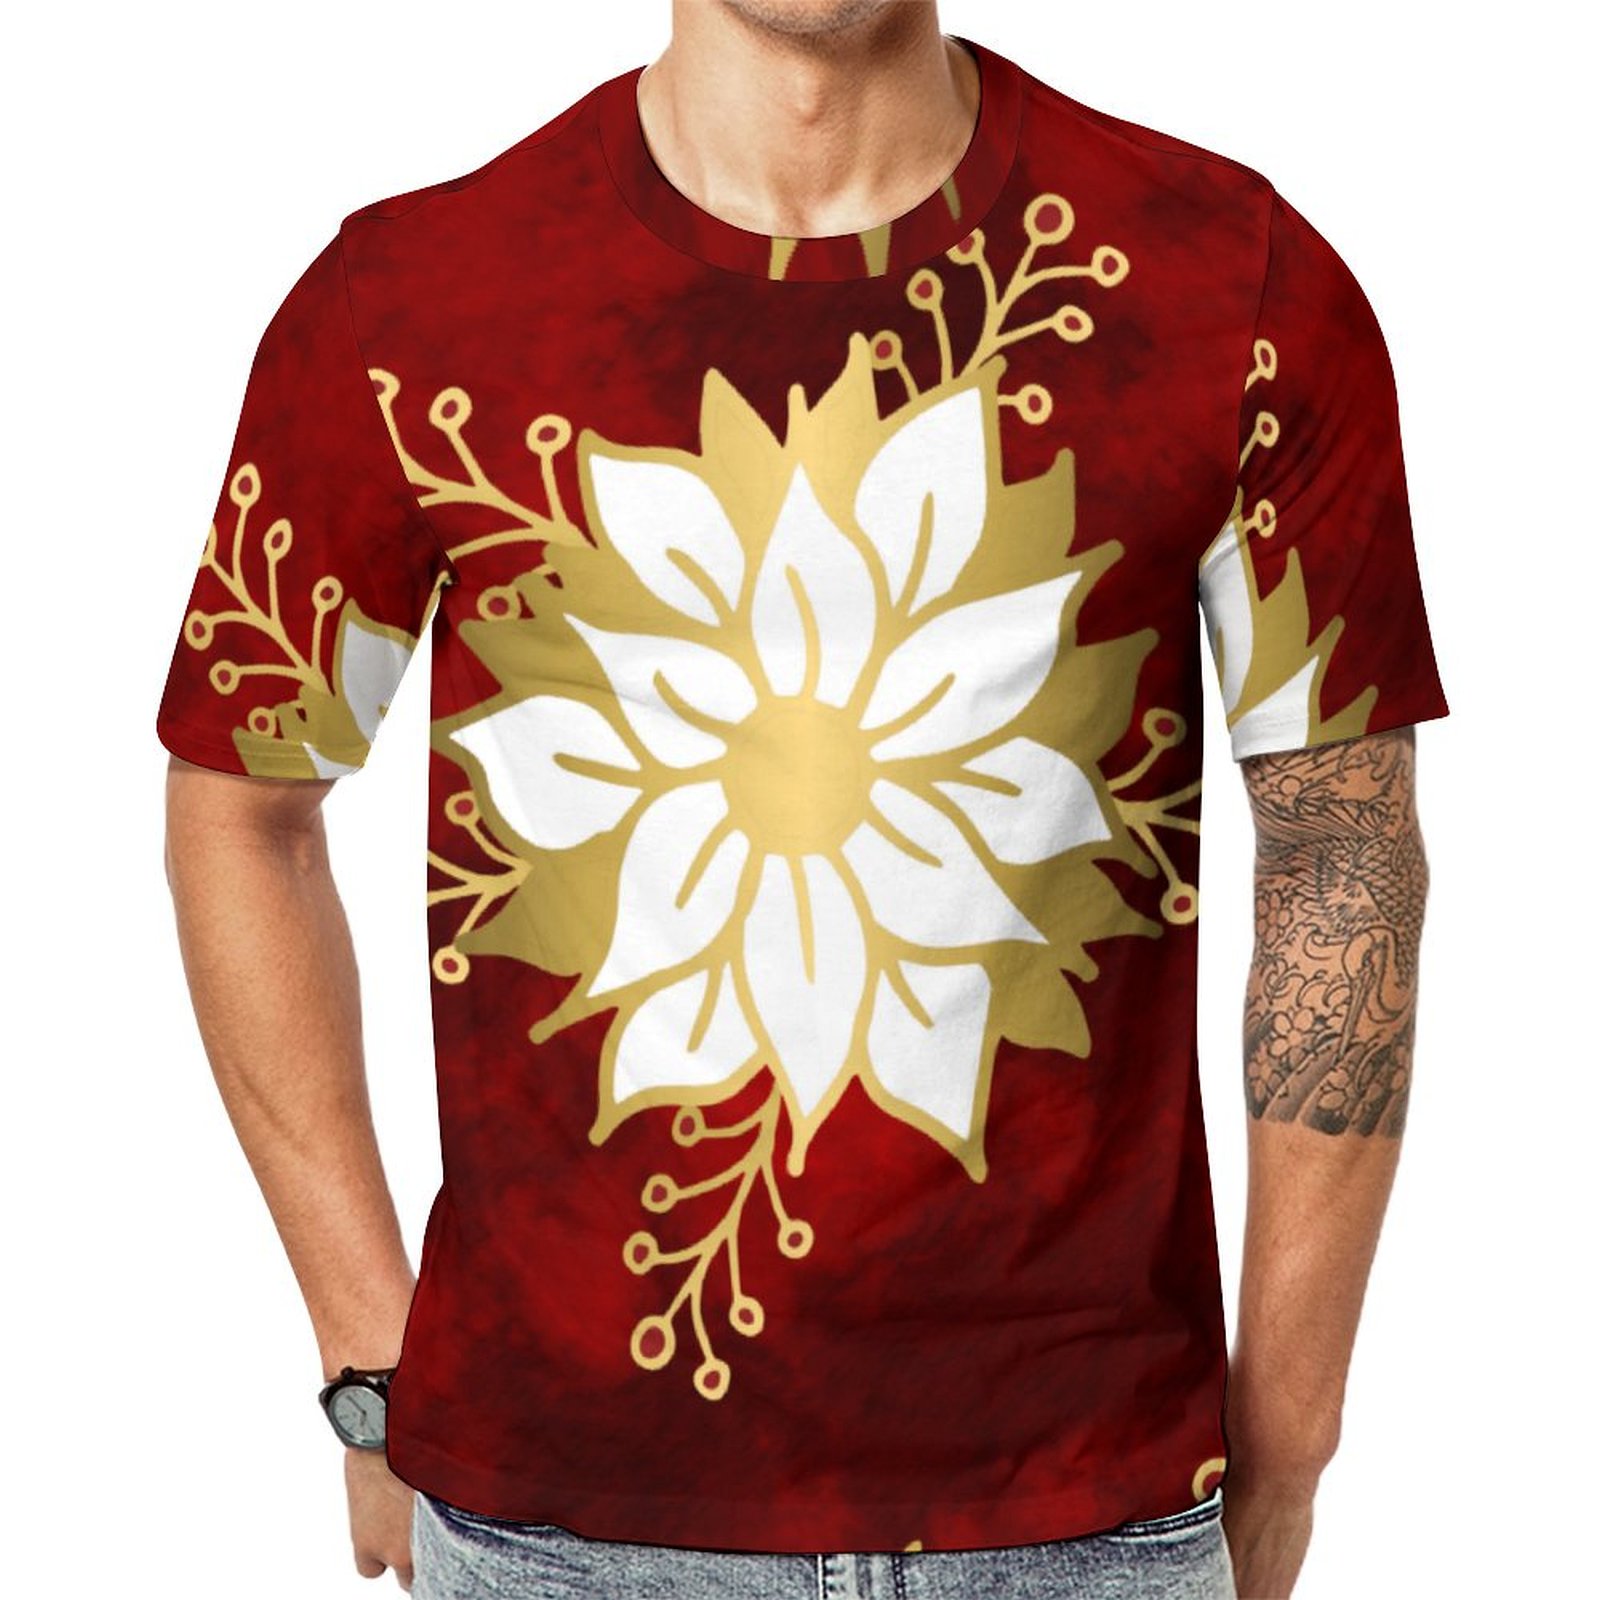 Elegant Red Gold White Poinsettia Flower Short Sleeve Print Unisex Tshirt Summer Casual Tees for Men and Women Coolcoshirts